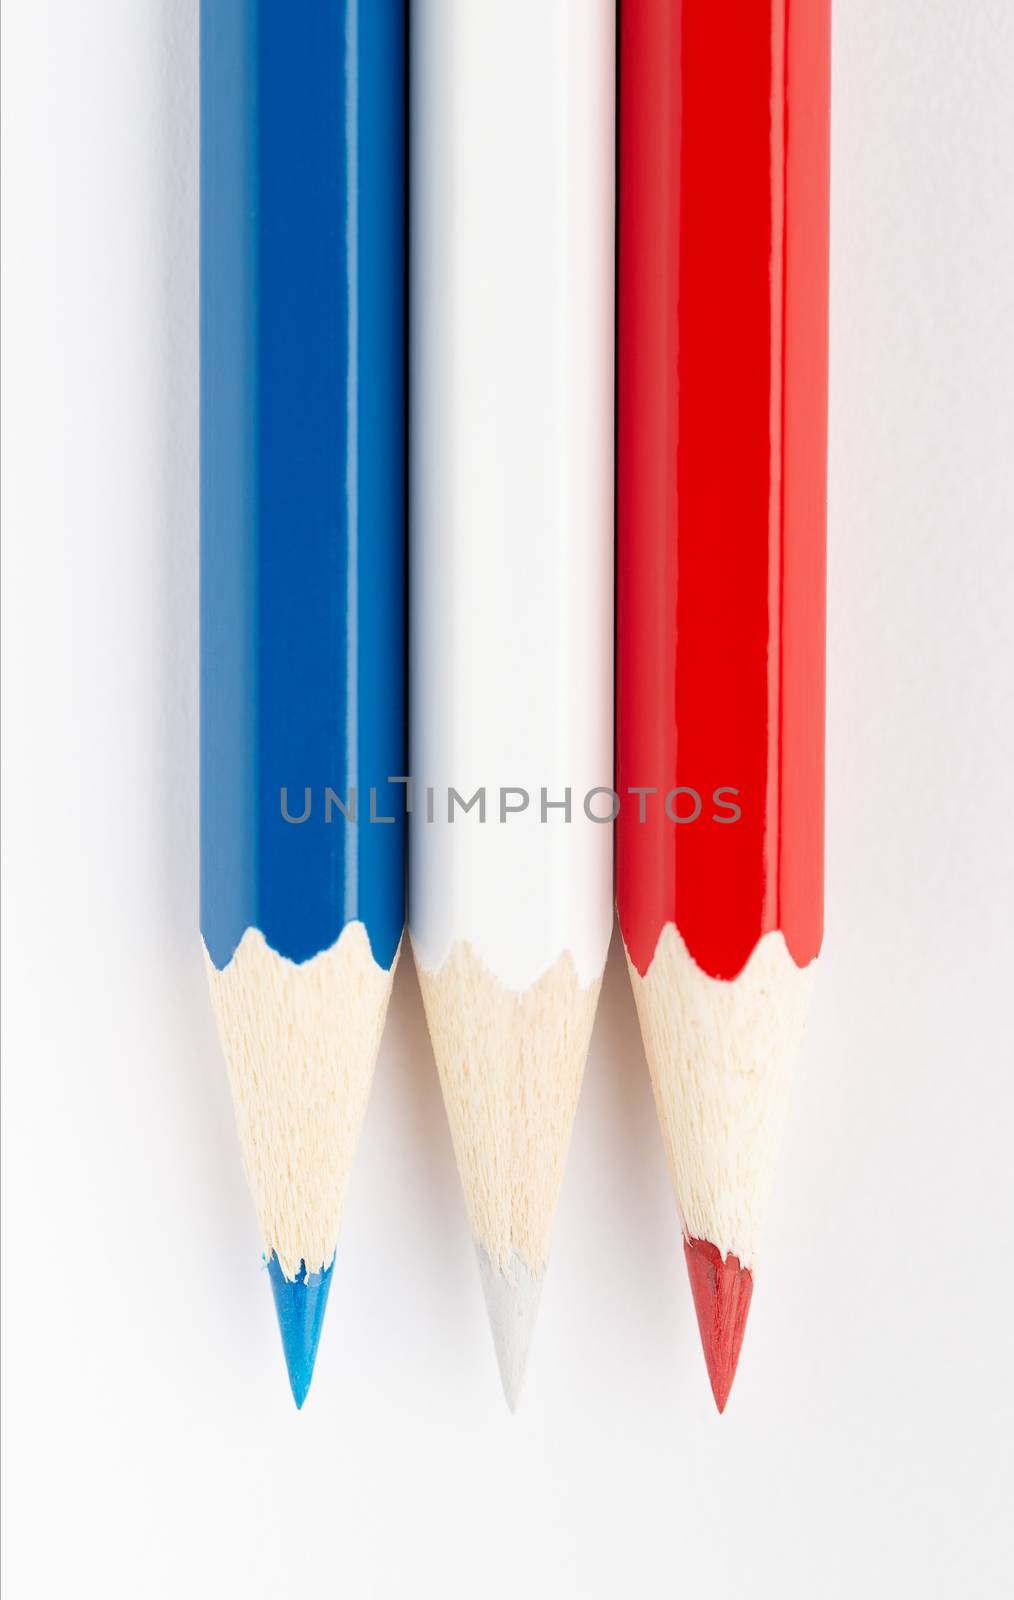 The Flags of different countries on a white background from colored pencils France